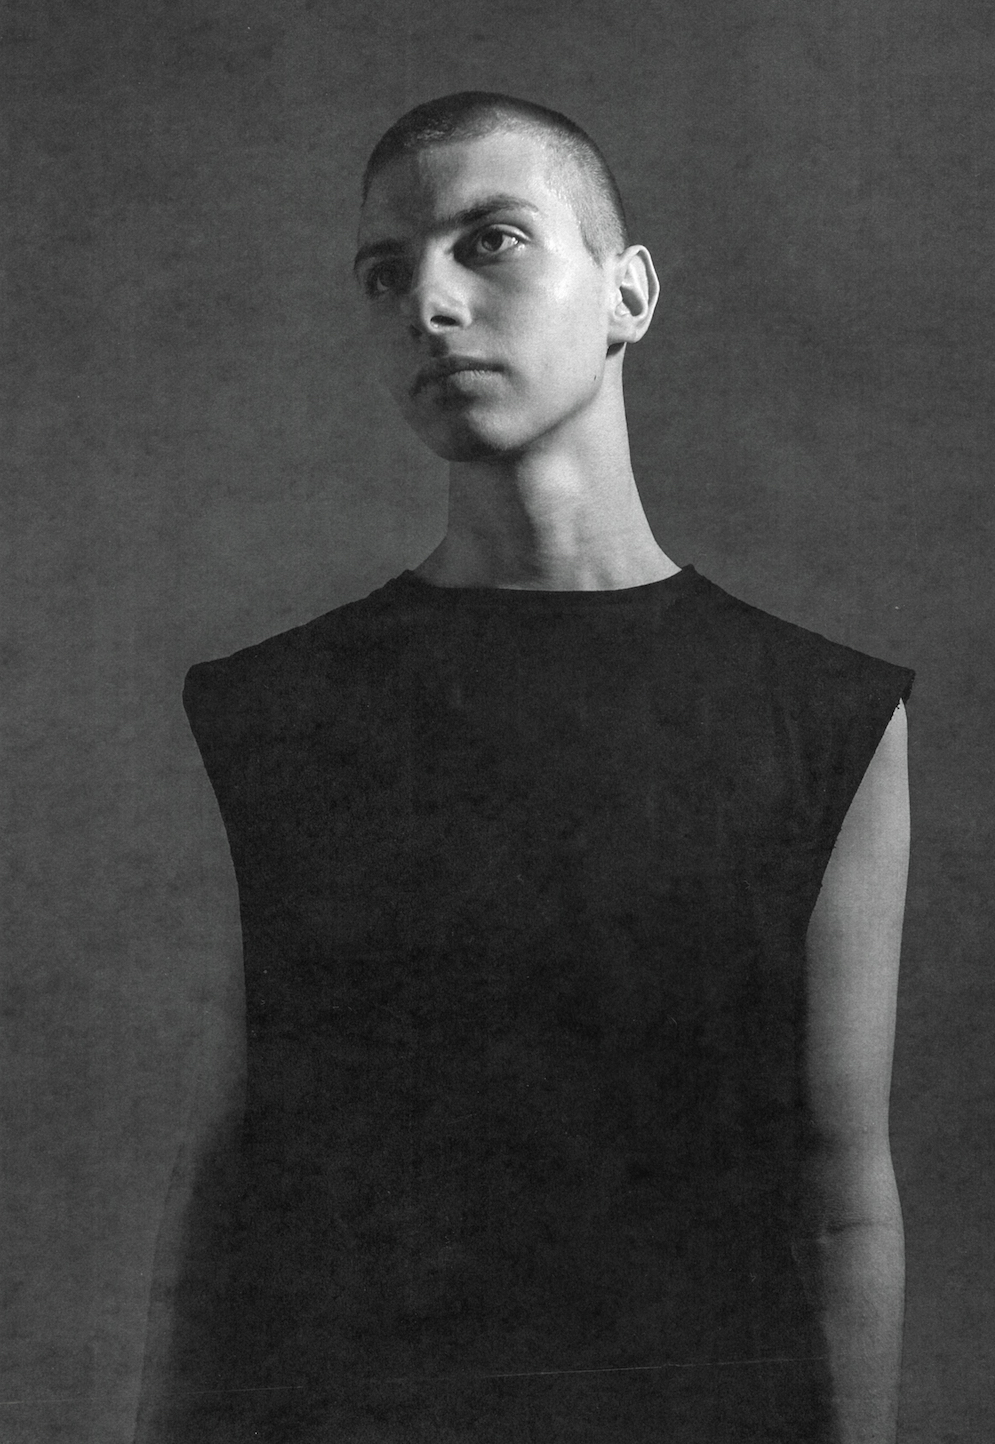 <p><span>This portrait of Ivan Shabanov was taken by Anya Gorkova in Moscow as part of her study on masculinity, gender presentation, vulnerability, and how our physical bodies communicate such ideas.</span></p>